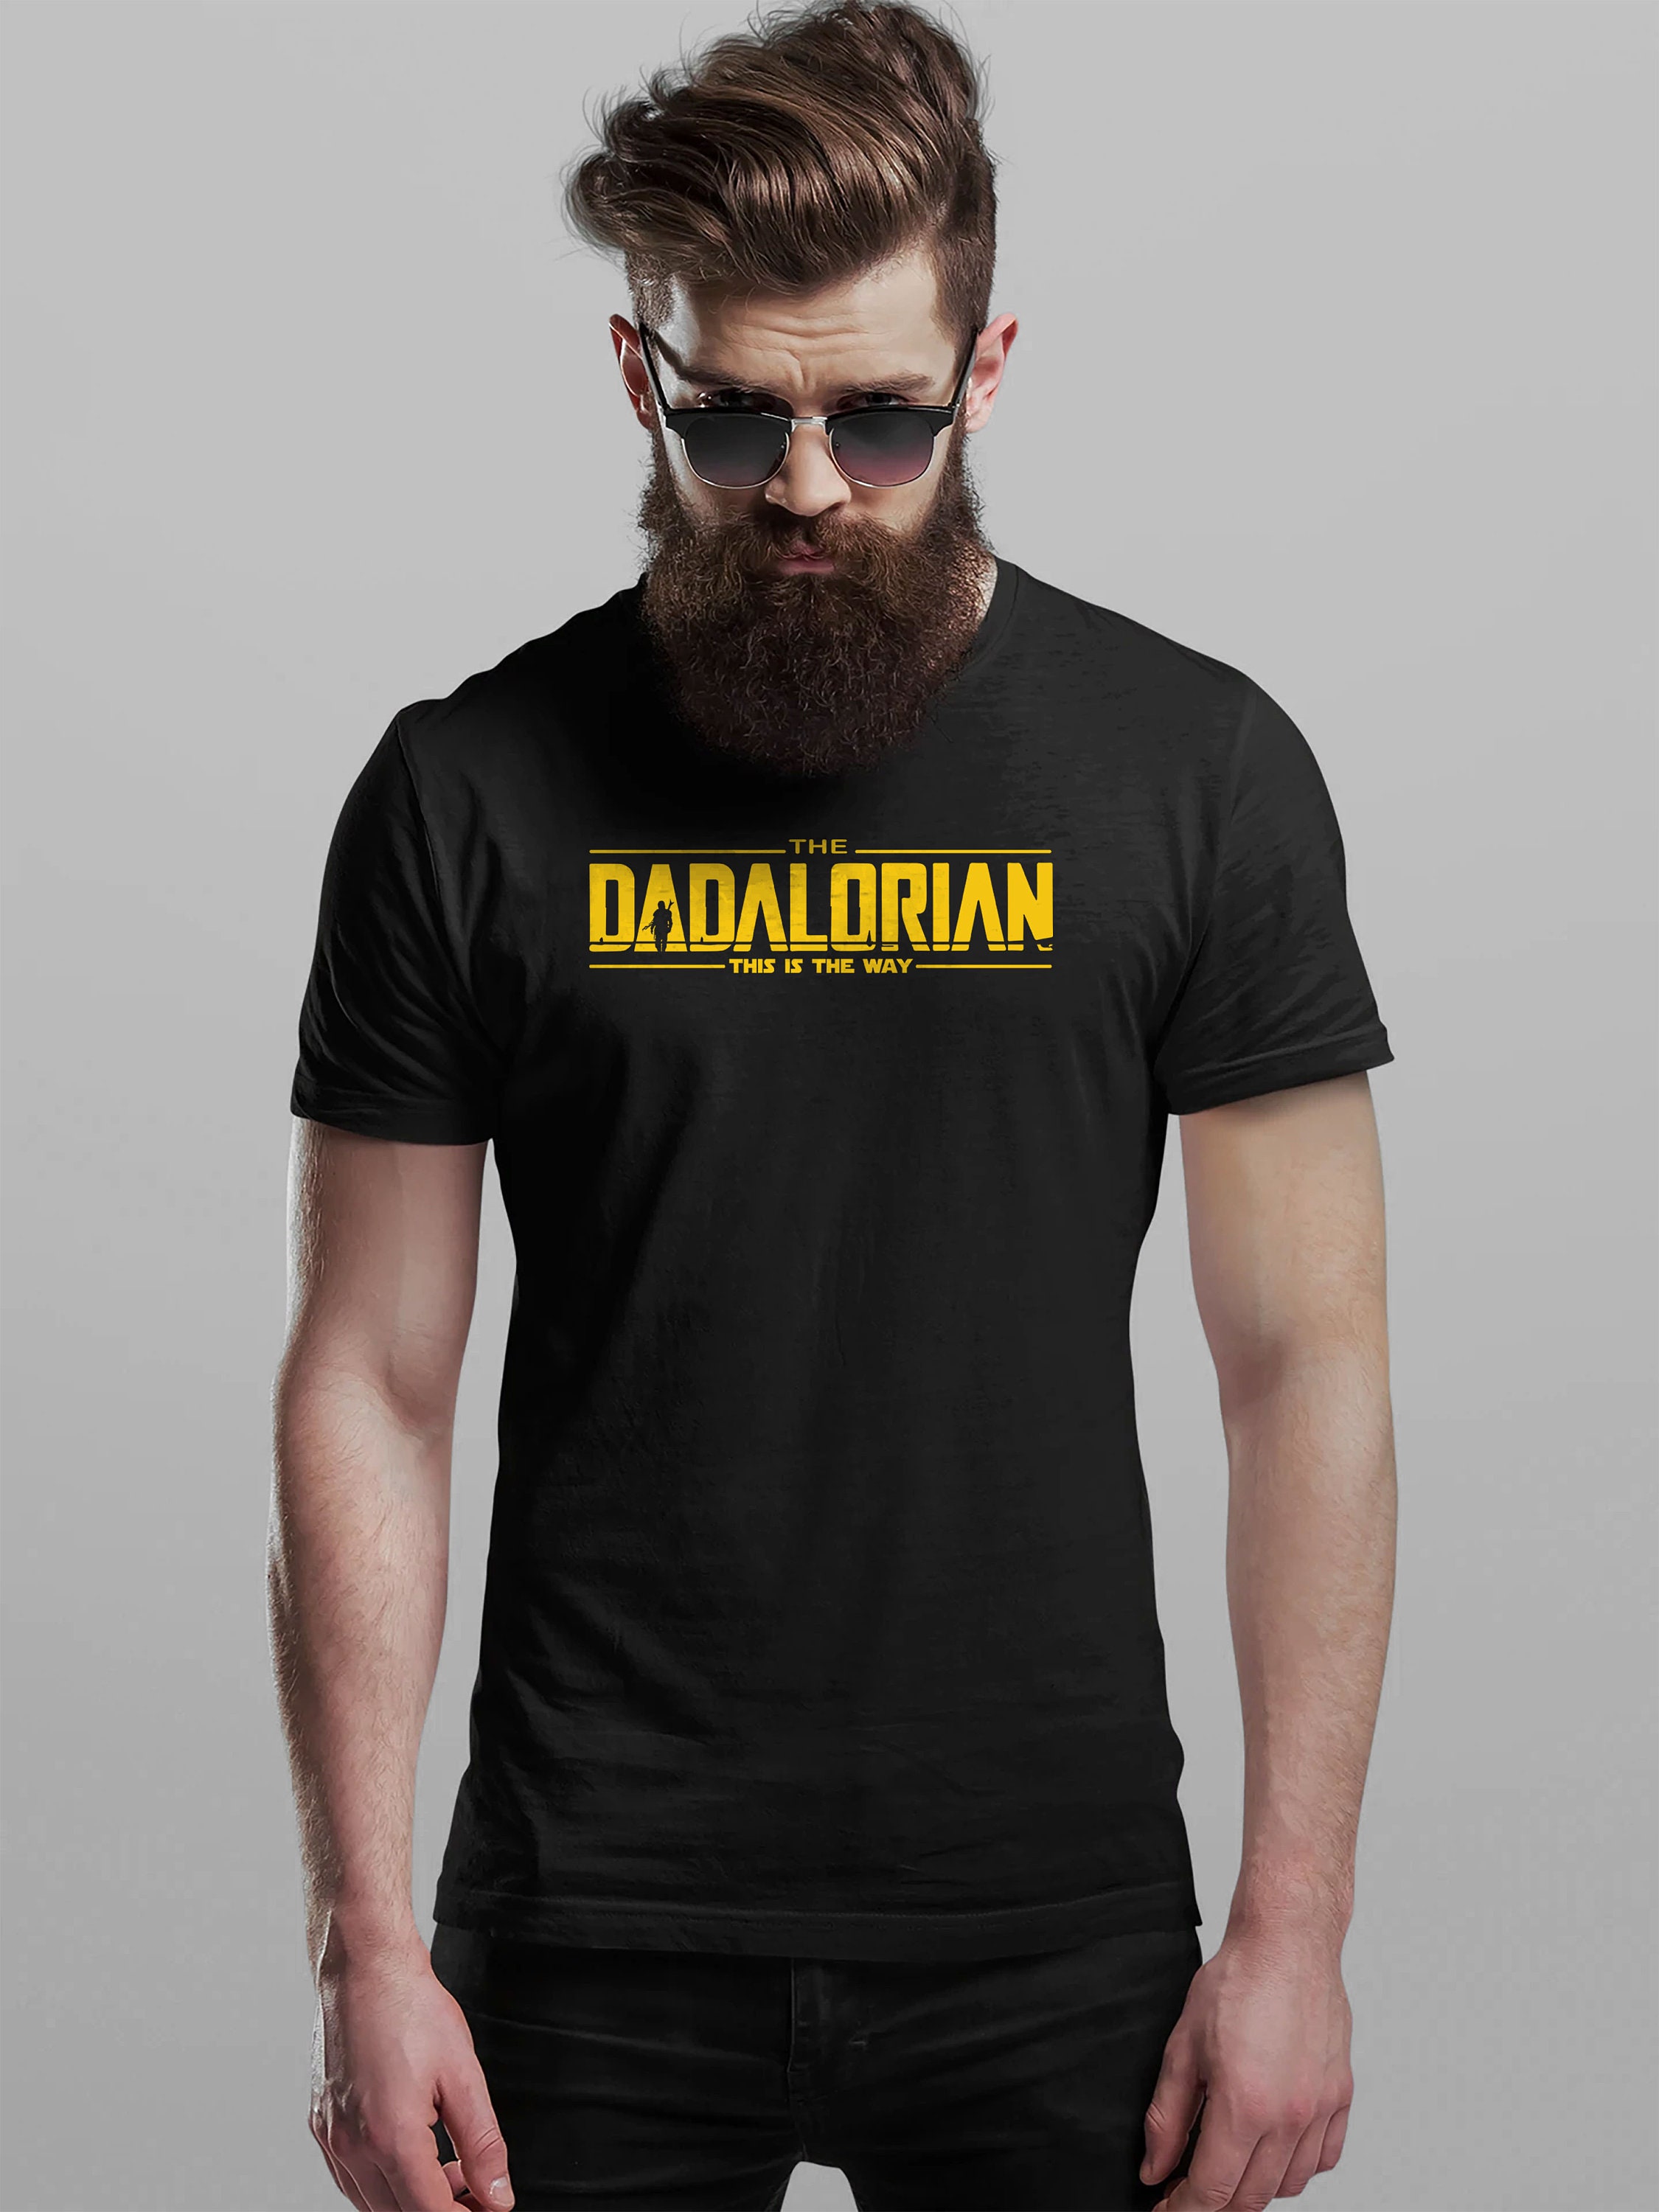 Fathers Day T Shirt The Dadalorian This Is The Way Men’s Fun Gift Novelty